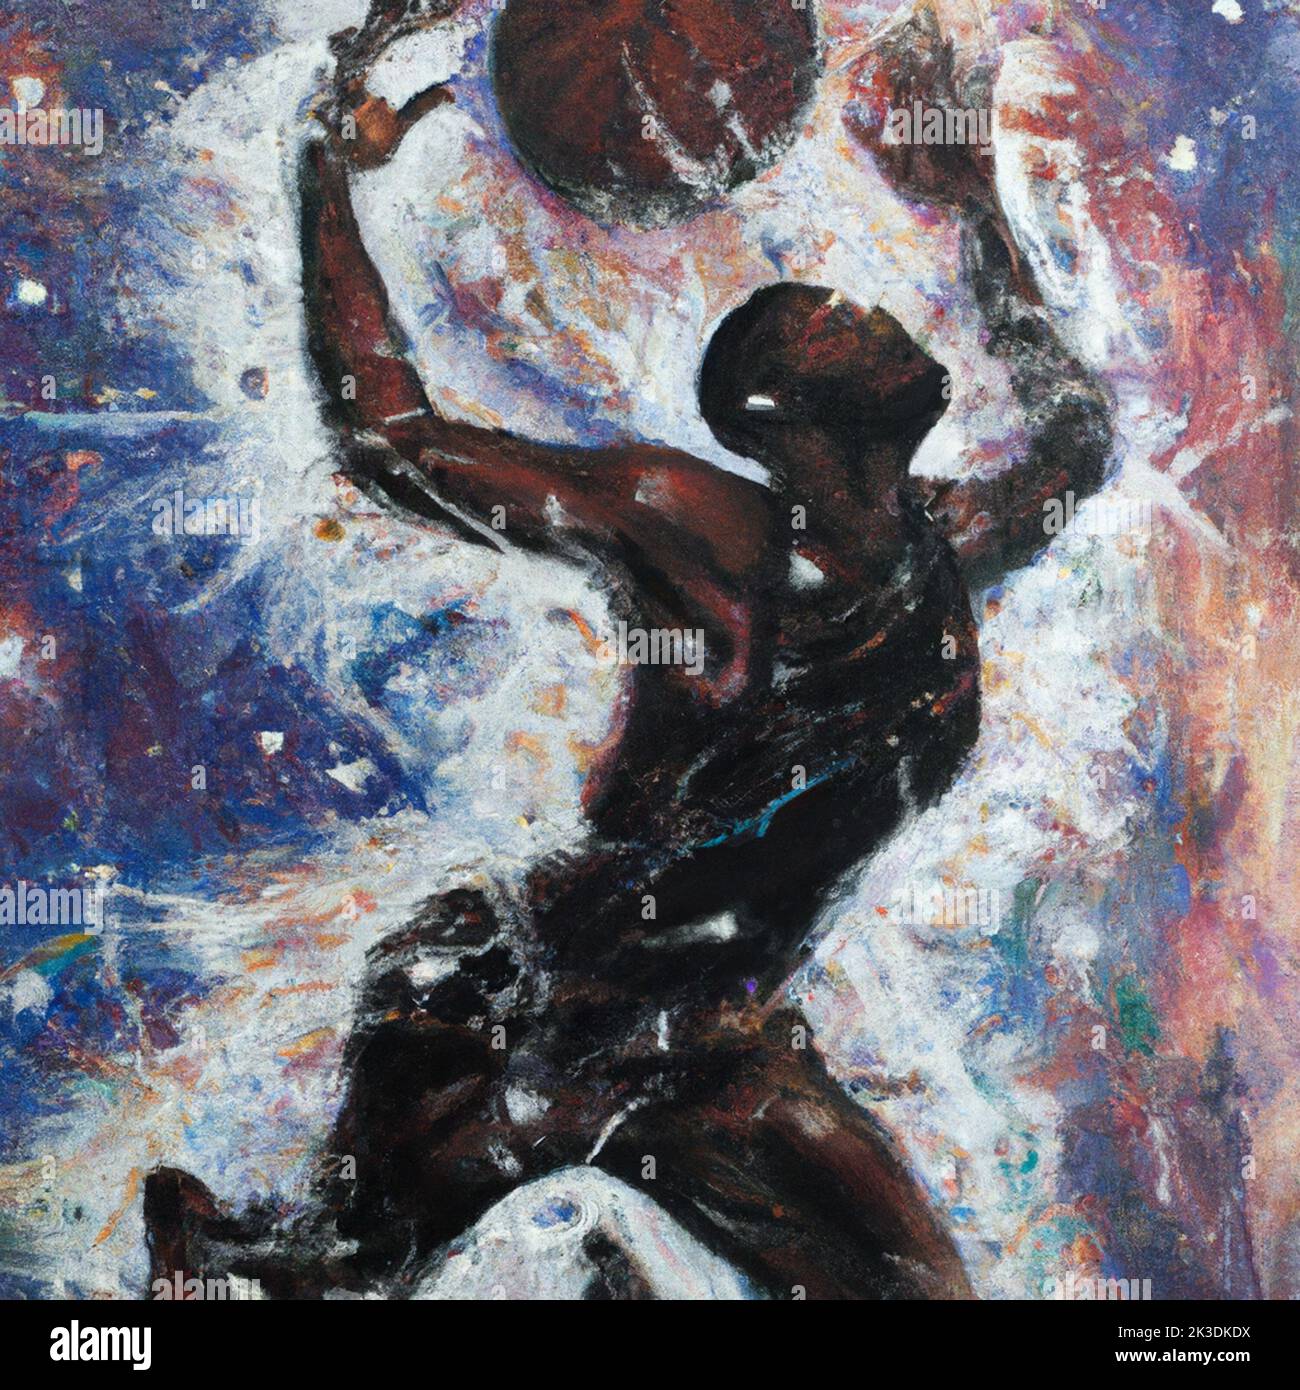 drawing painting of a basketball player dunking as an explosion of a nebula Stock Photo